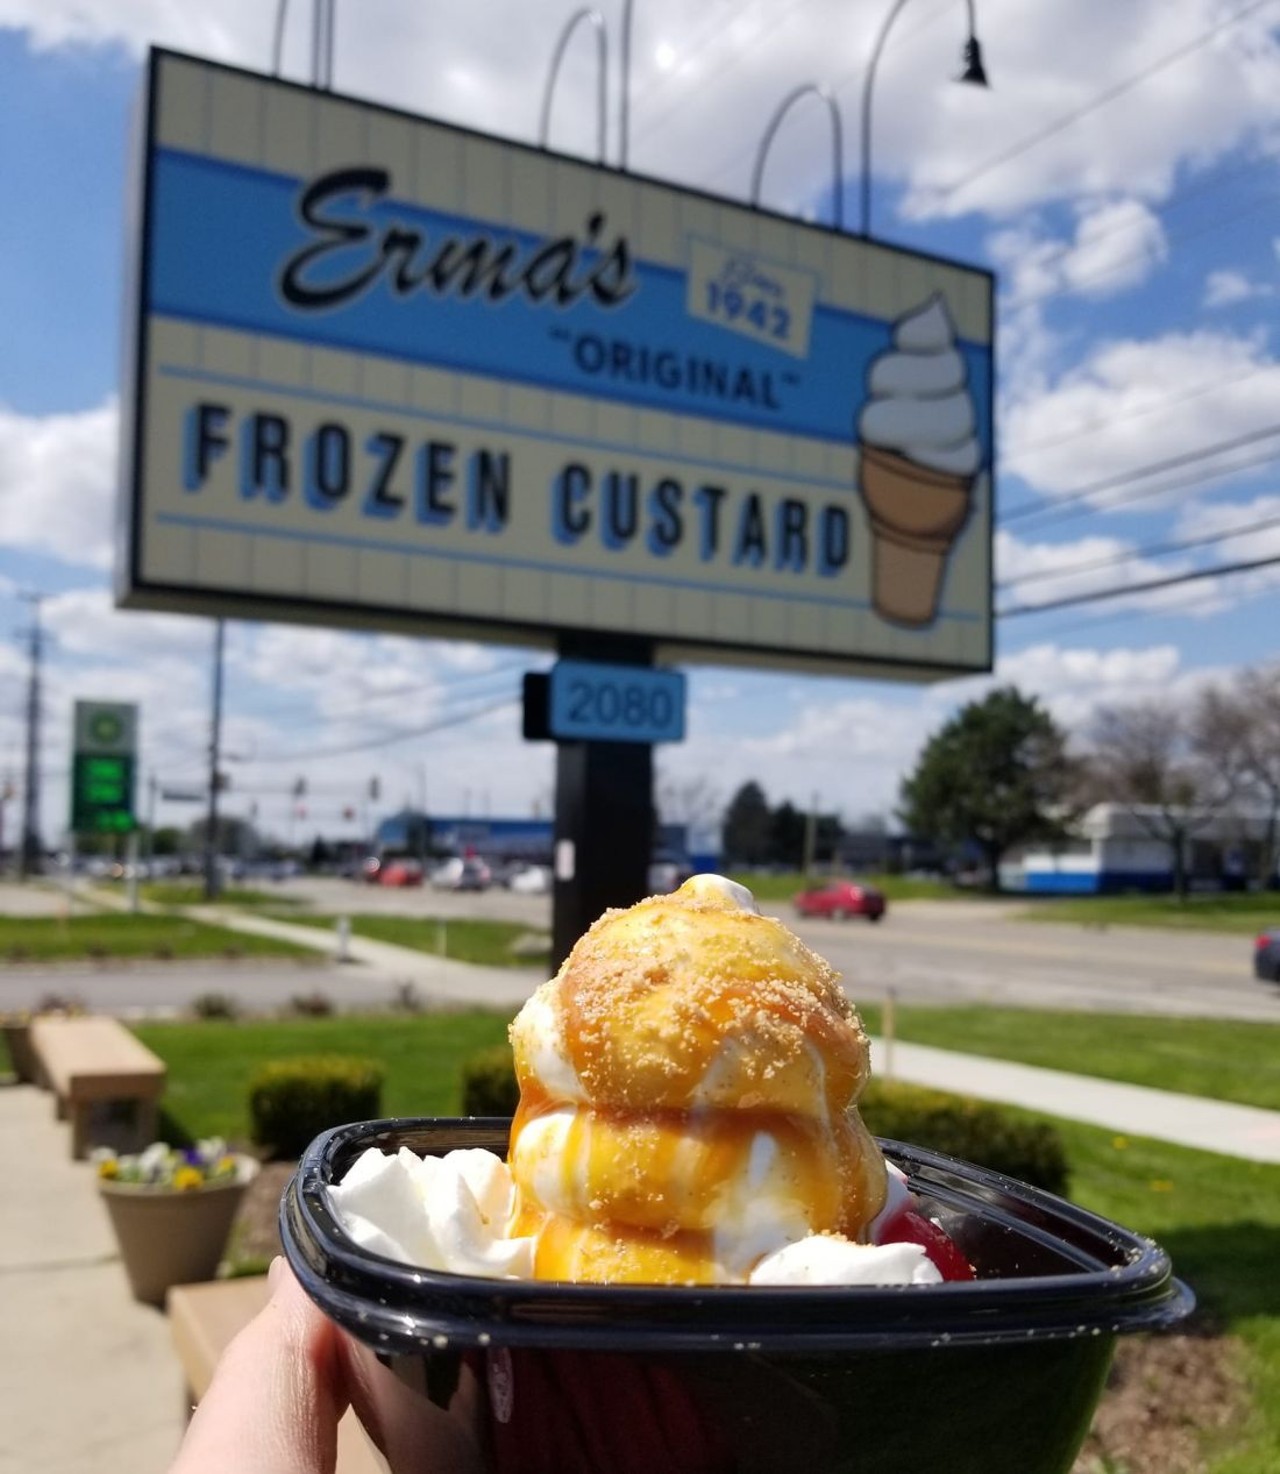 Erma&#146;s Original Frozen Custard
6451 Auburn Rd., Shelby Township; 586-254-3080 | 2080 14 Mile Rd., Warren; 586-275-2447 | 28840 Harper Ave., St. Clair Shores; 586-275-2447; ermascustard.com
For 75 years, Erma&#146;s has been dishing, er, squeezing, out delicious frozen custard. What originated as a little roadside stand in Utica is now a must-slurp spot. In addition to the regular offerings, Erma's serves up three weekly flavors that rotate throughout the season. One of them is always a Dole soft serve made with fruit juice instead of dairy for the vegans who want in on the action.
Photo via Erma&#146;s Original Frozen Custard/Facebook